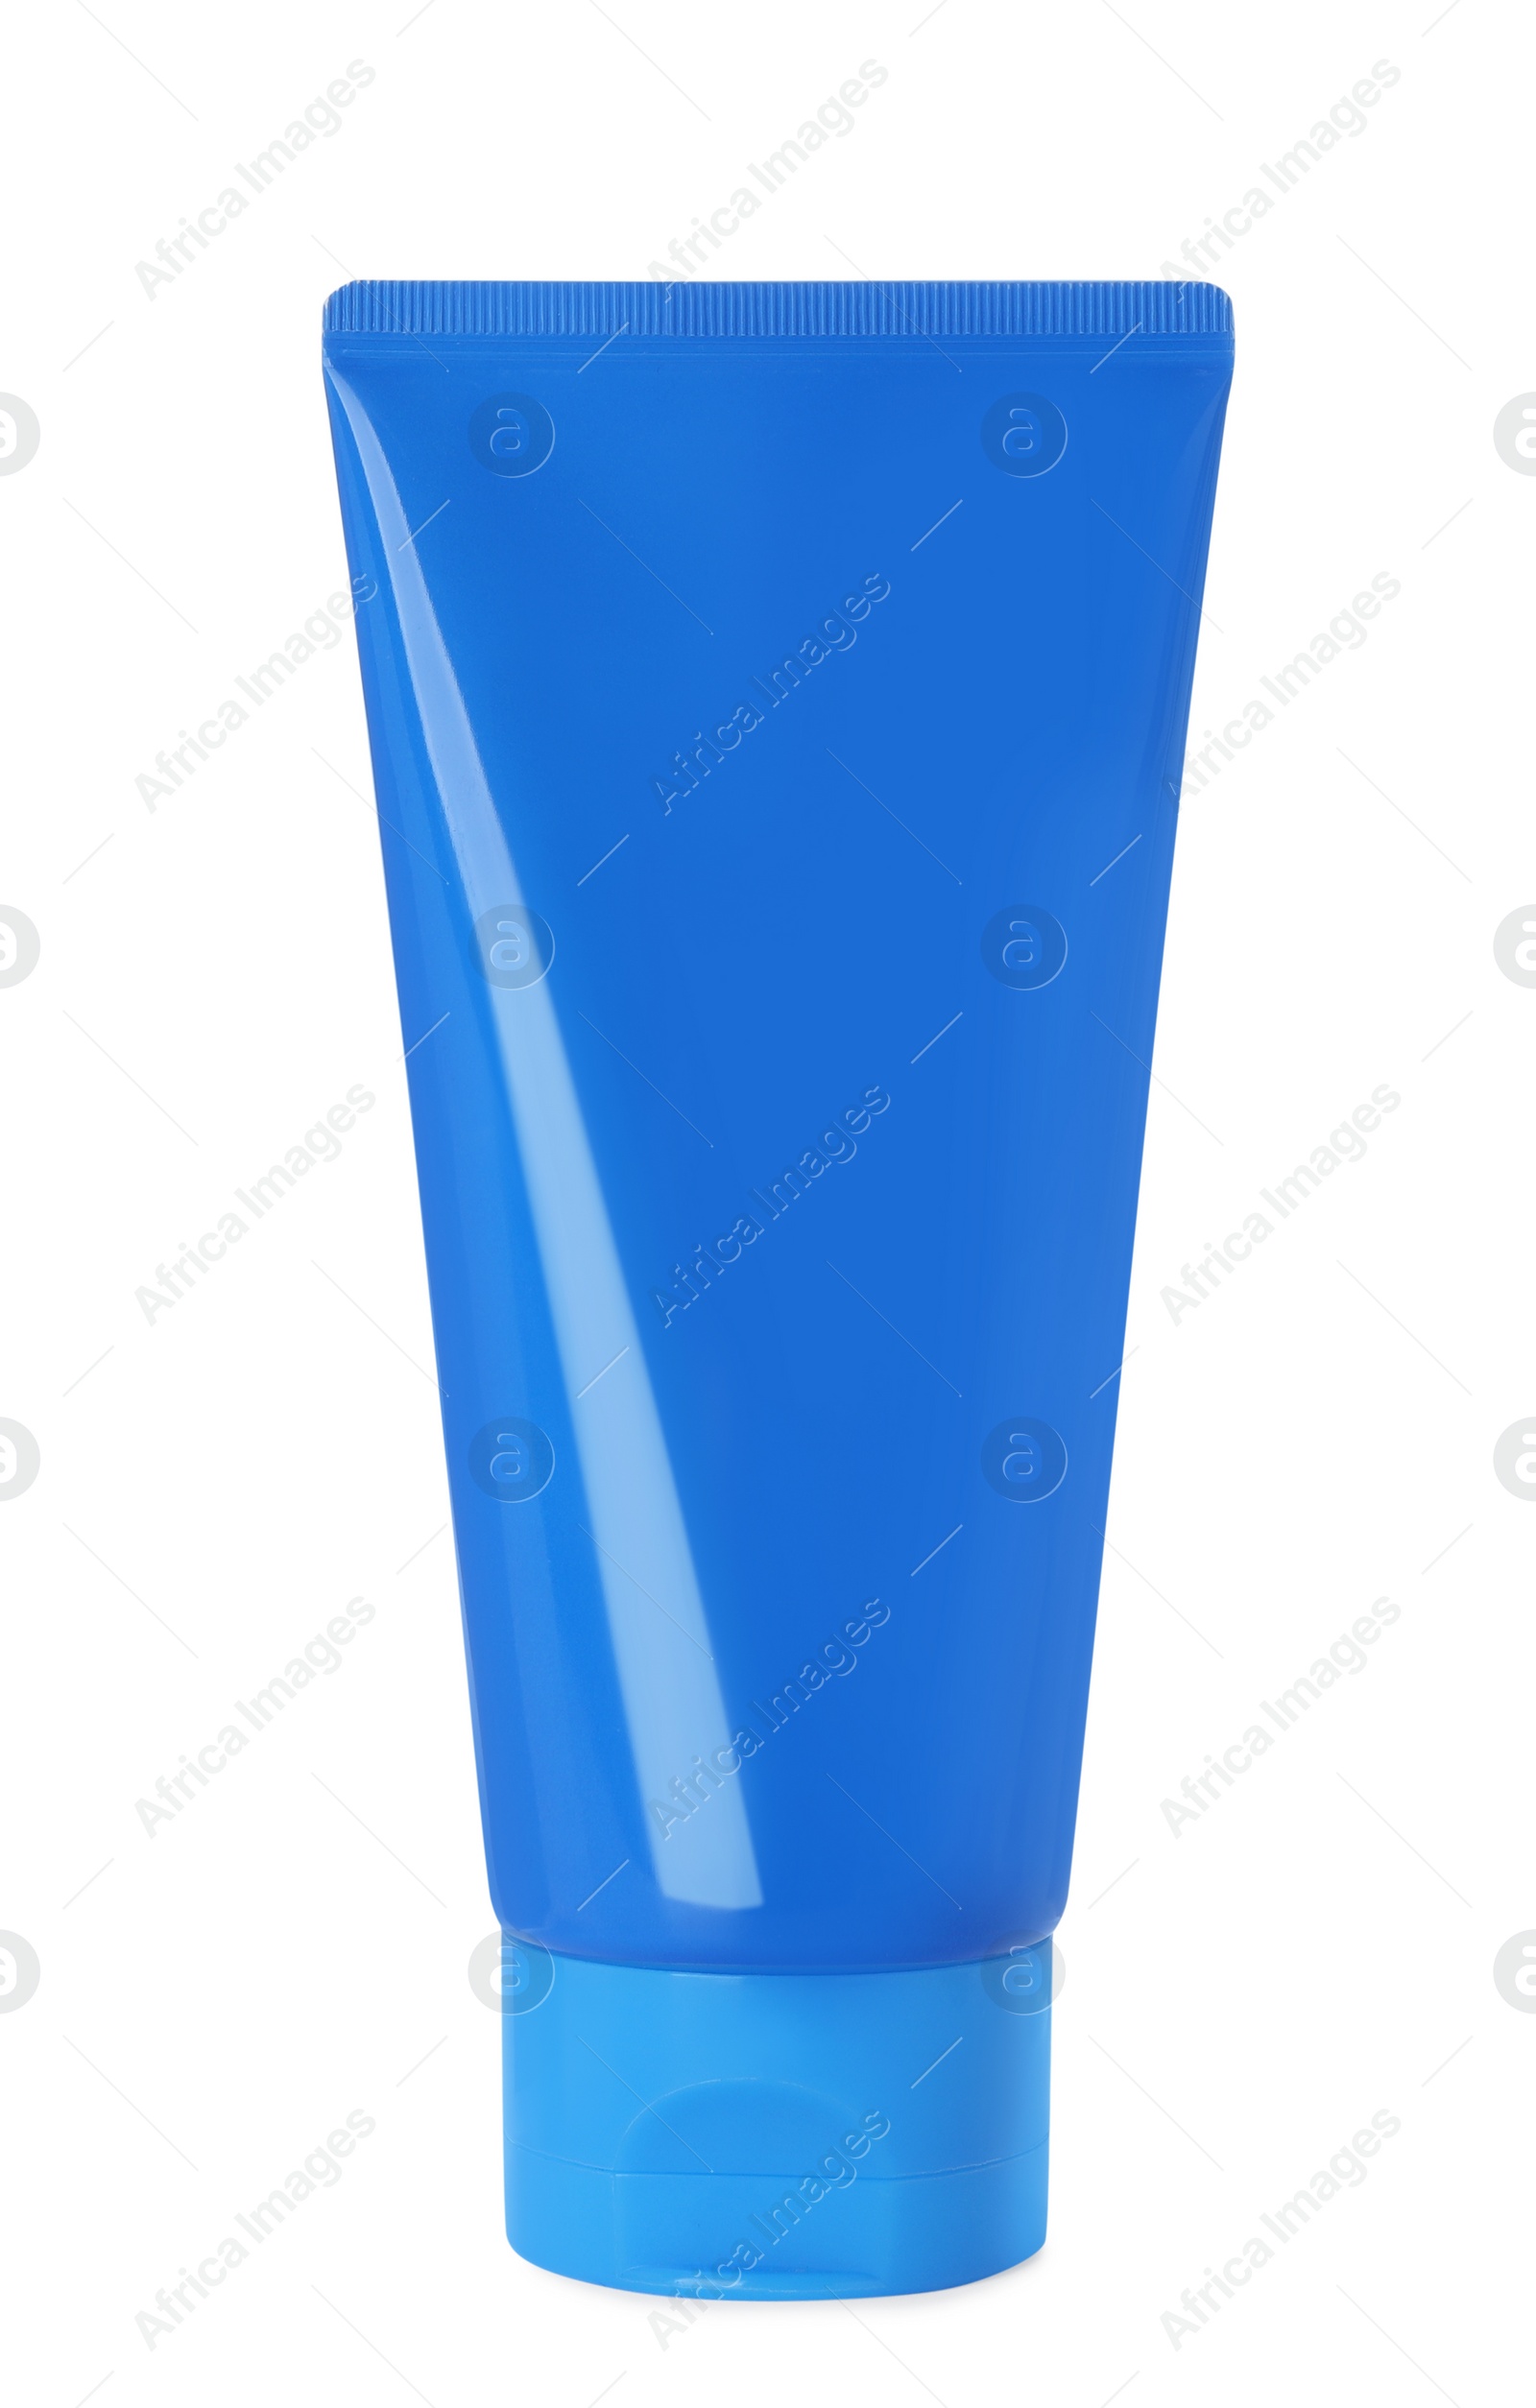 Photo of Tube of face cleansing product isolated on white